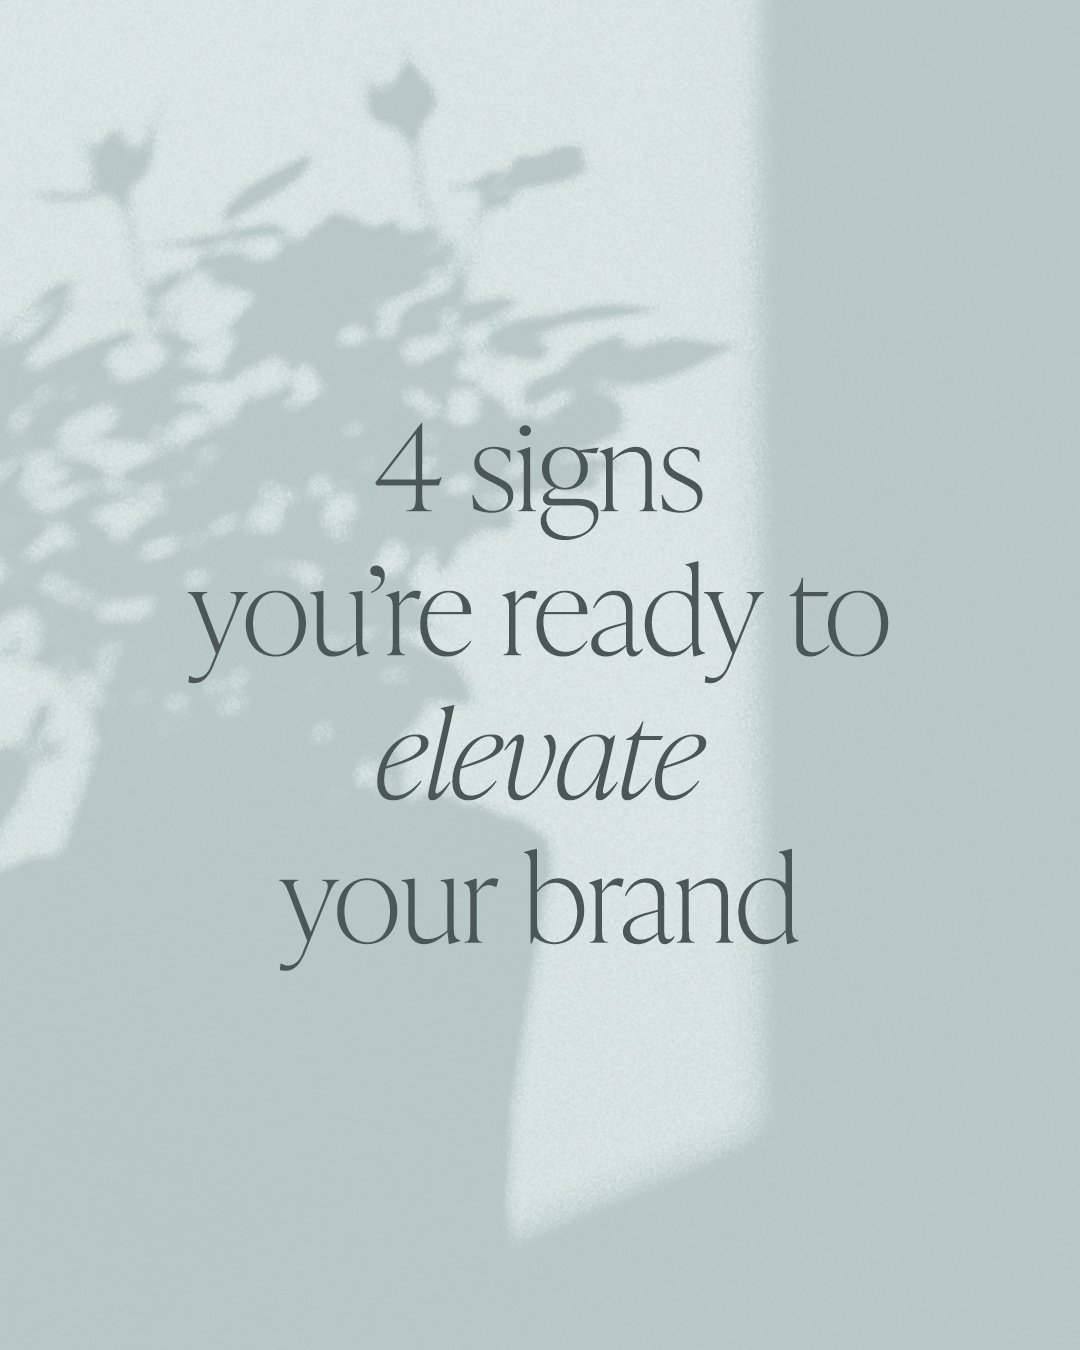 The sense that you&rsquo;re ready to expand into your business potential might present as a quiet, internal nudge before it becomes a full-body YES. Elevating your brand can help you step up with confidence, presenting your authentic self and sharing